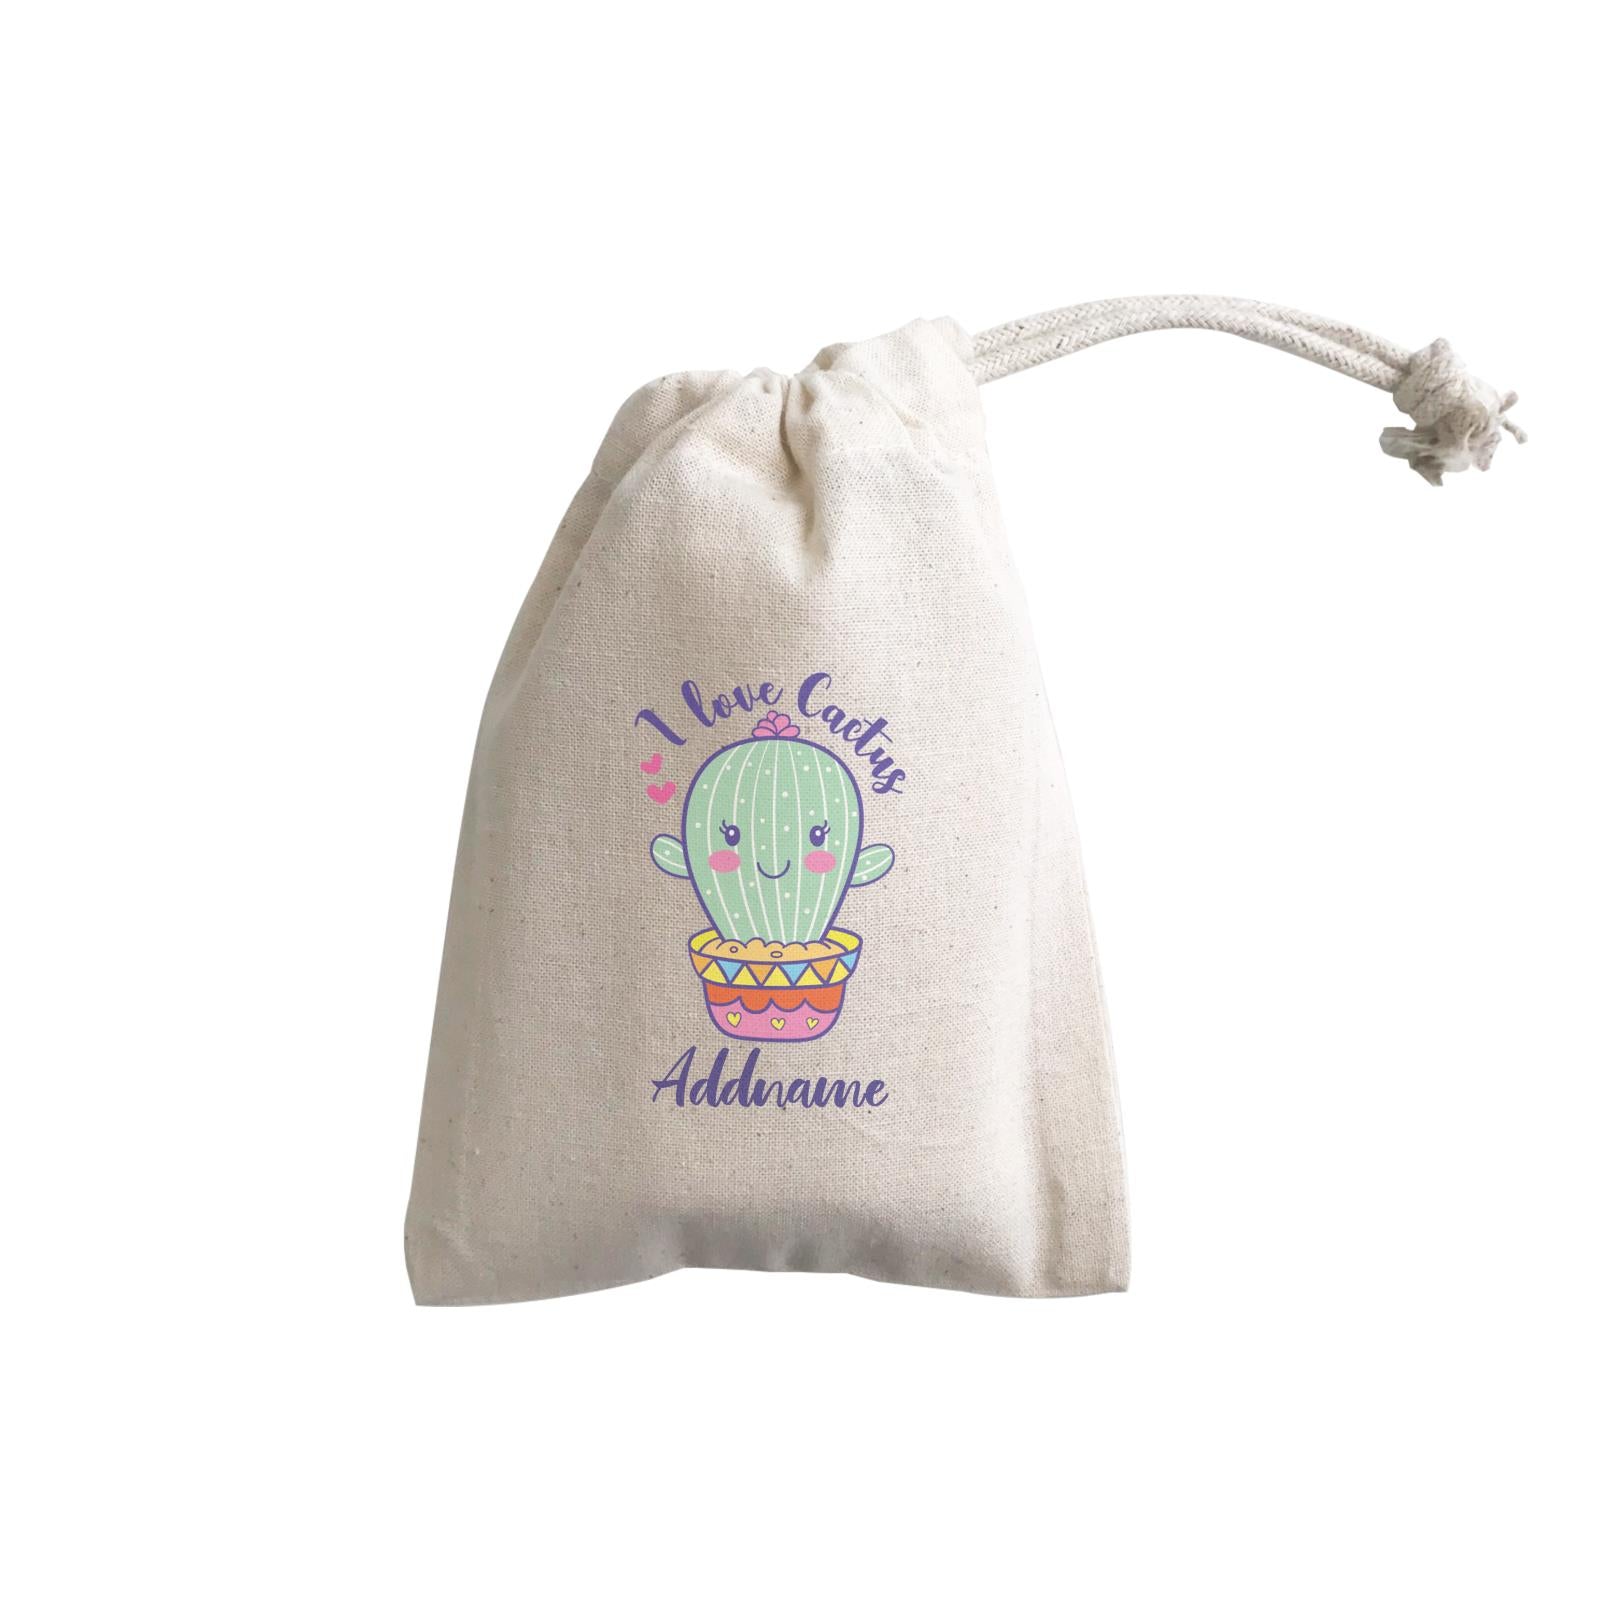 Cool Cute Plants I Love Cactus Addname GP Gift Pouch